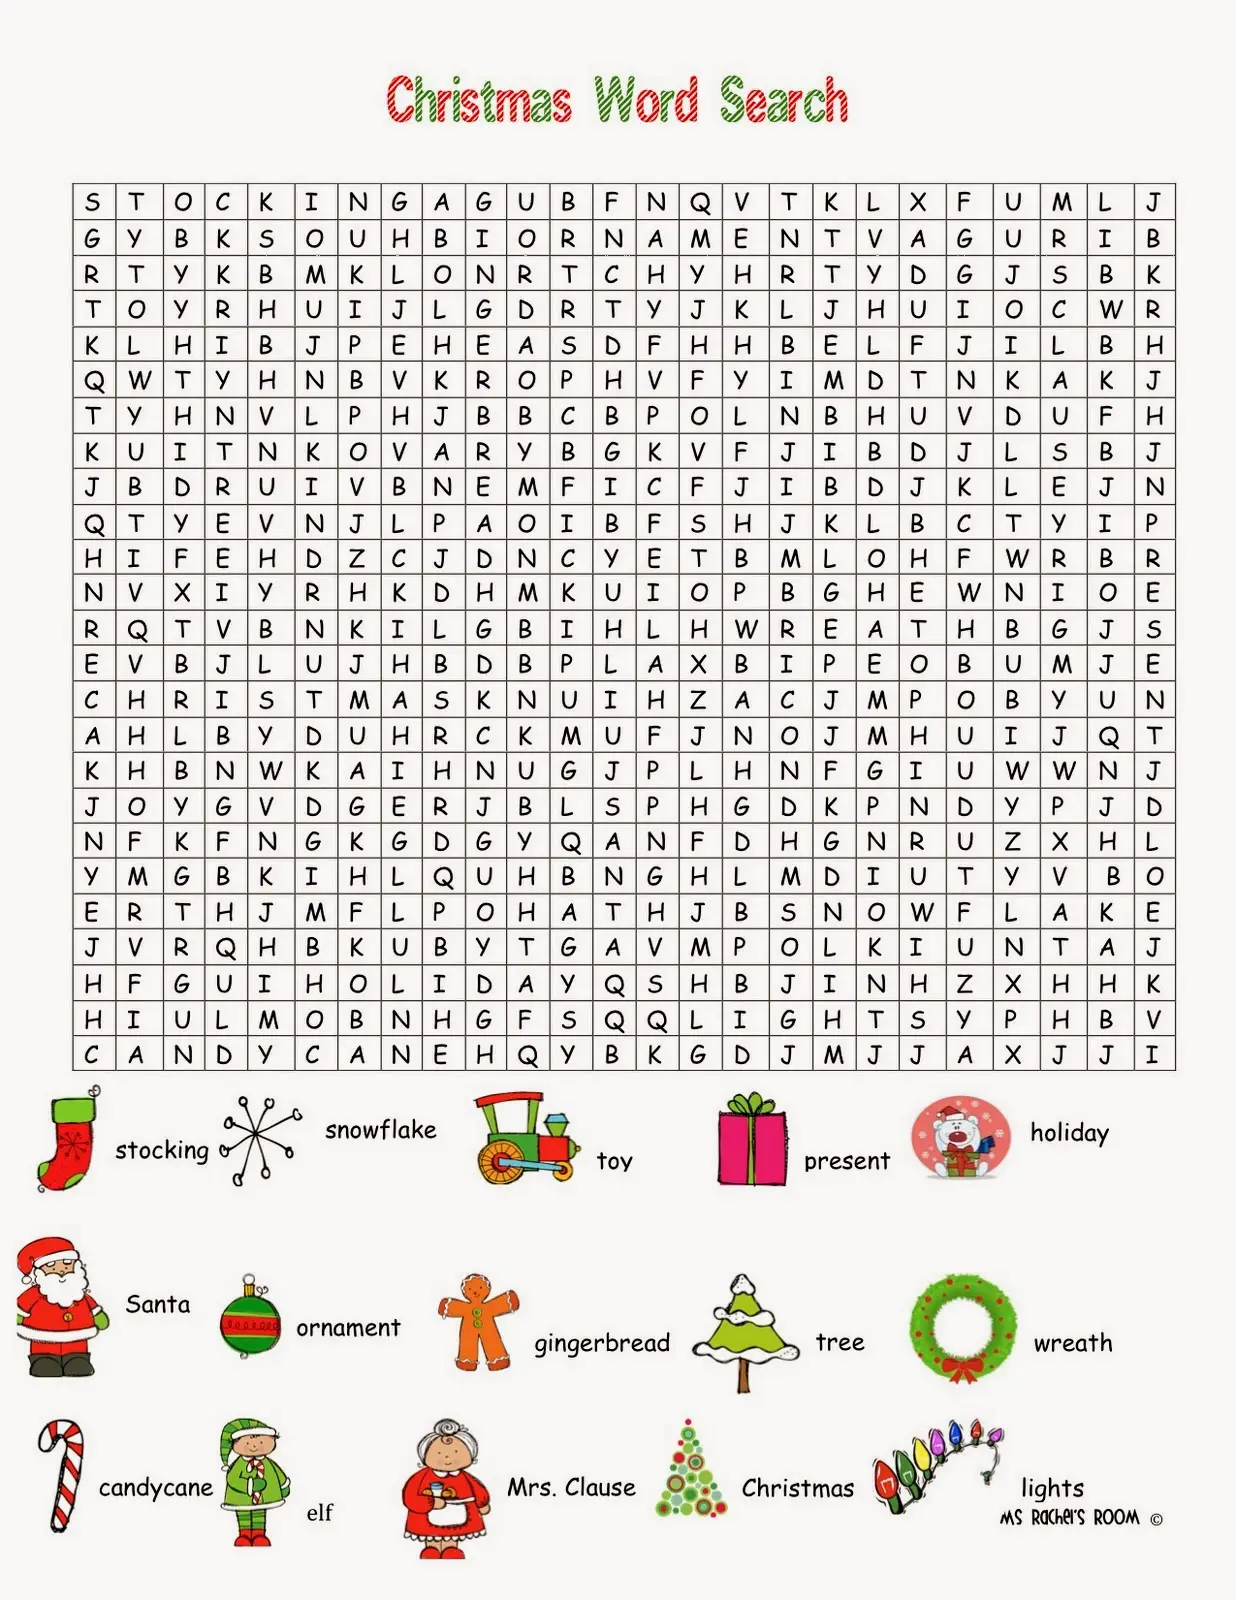 36 Printable Christmas Word Search Puzzles Kittybabylove Com